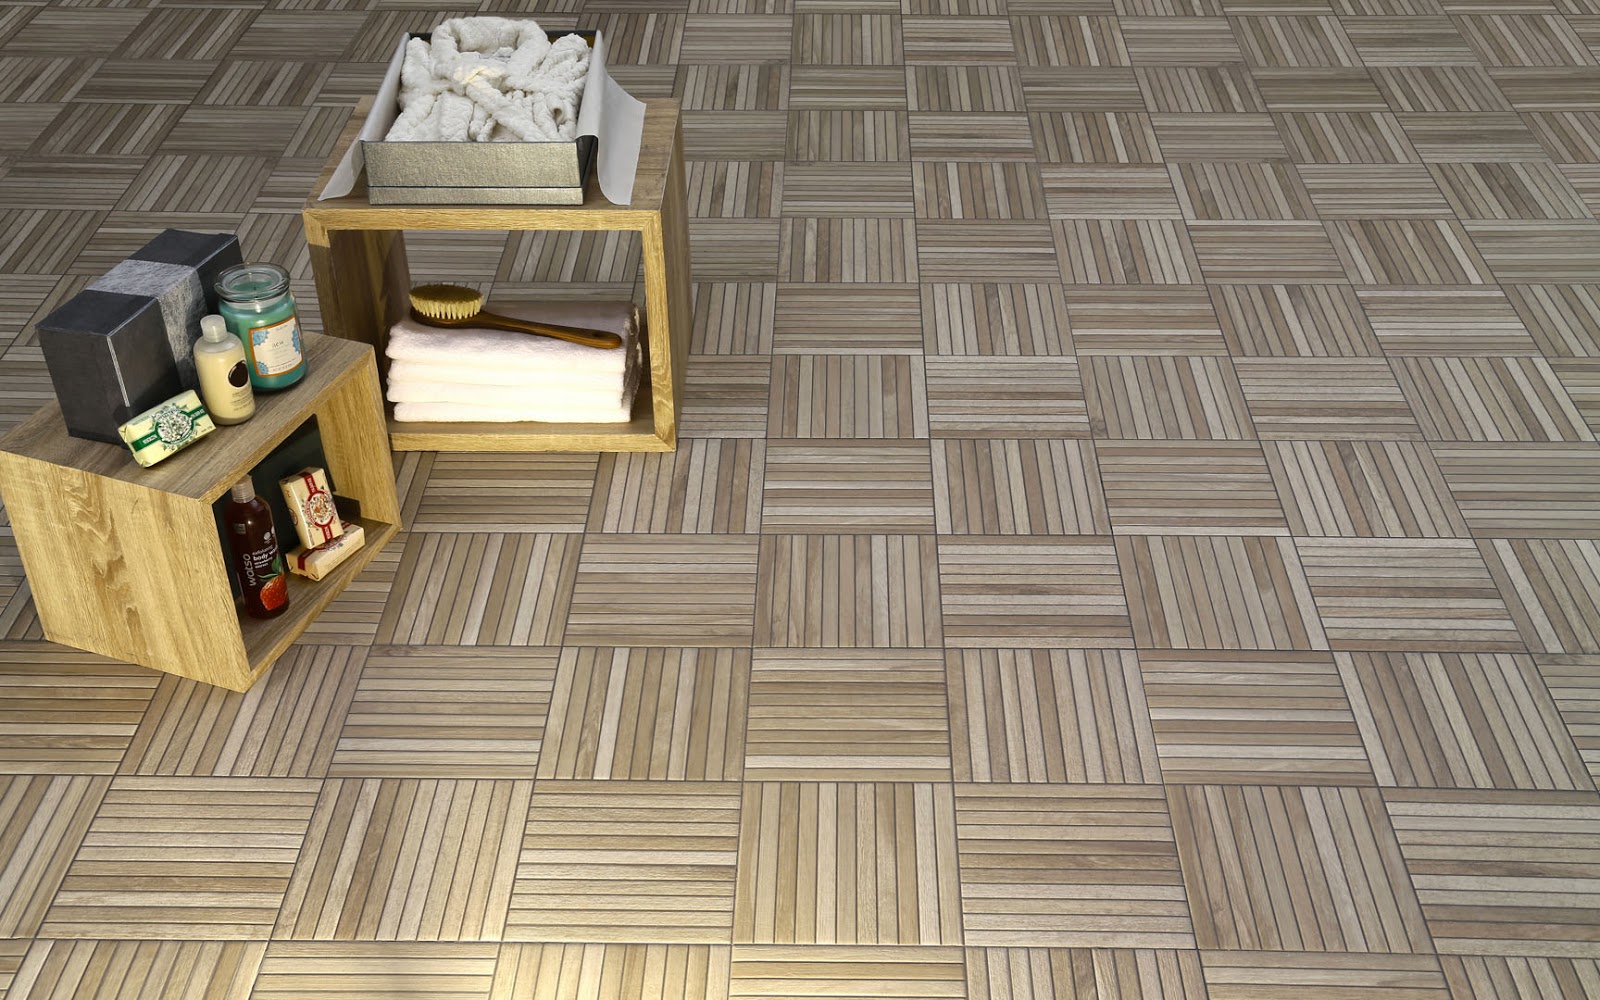 Sell Floor Tile Roman  dAstana from Indonesia by Pusat 